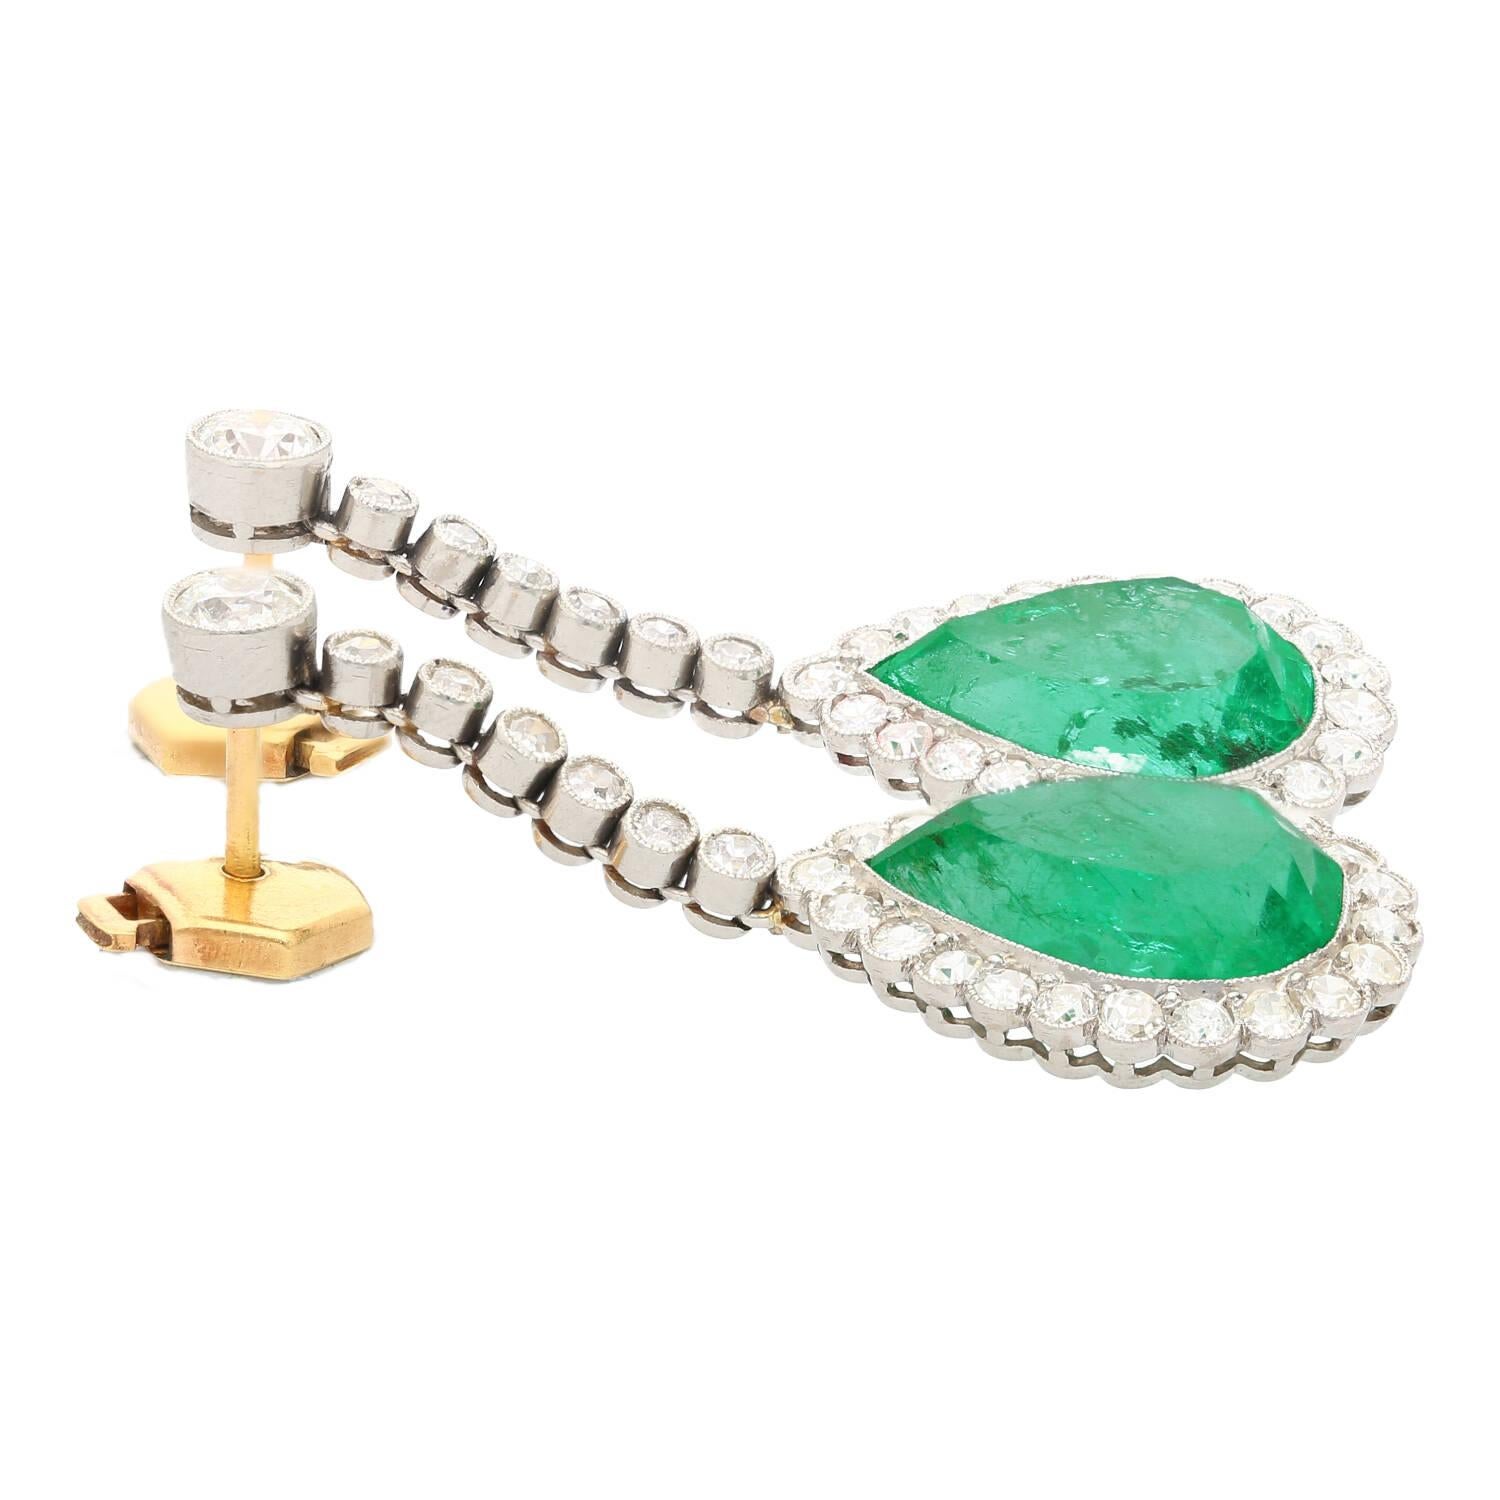 Vintage AGL Certified 10 Carat Colombian Emerald Drop Earrings in Platinum In Excellent Condition For Sale In Miami, FL